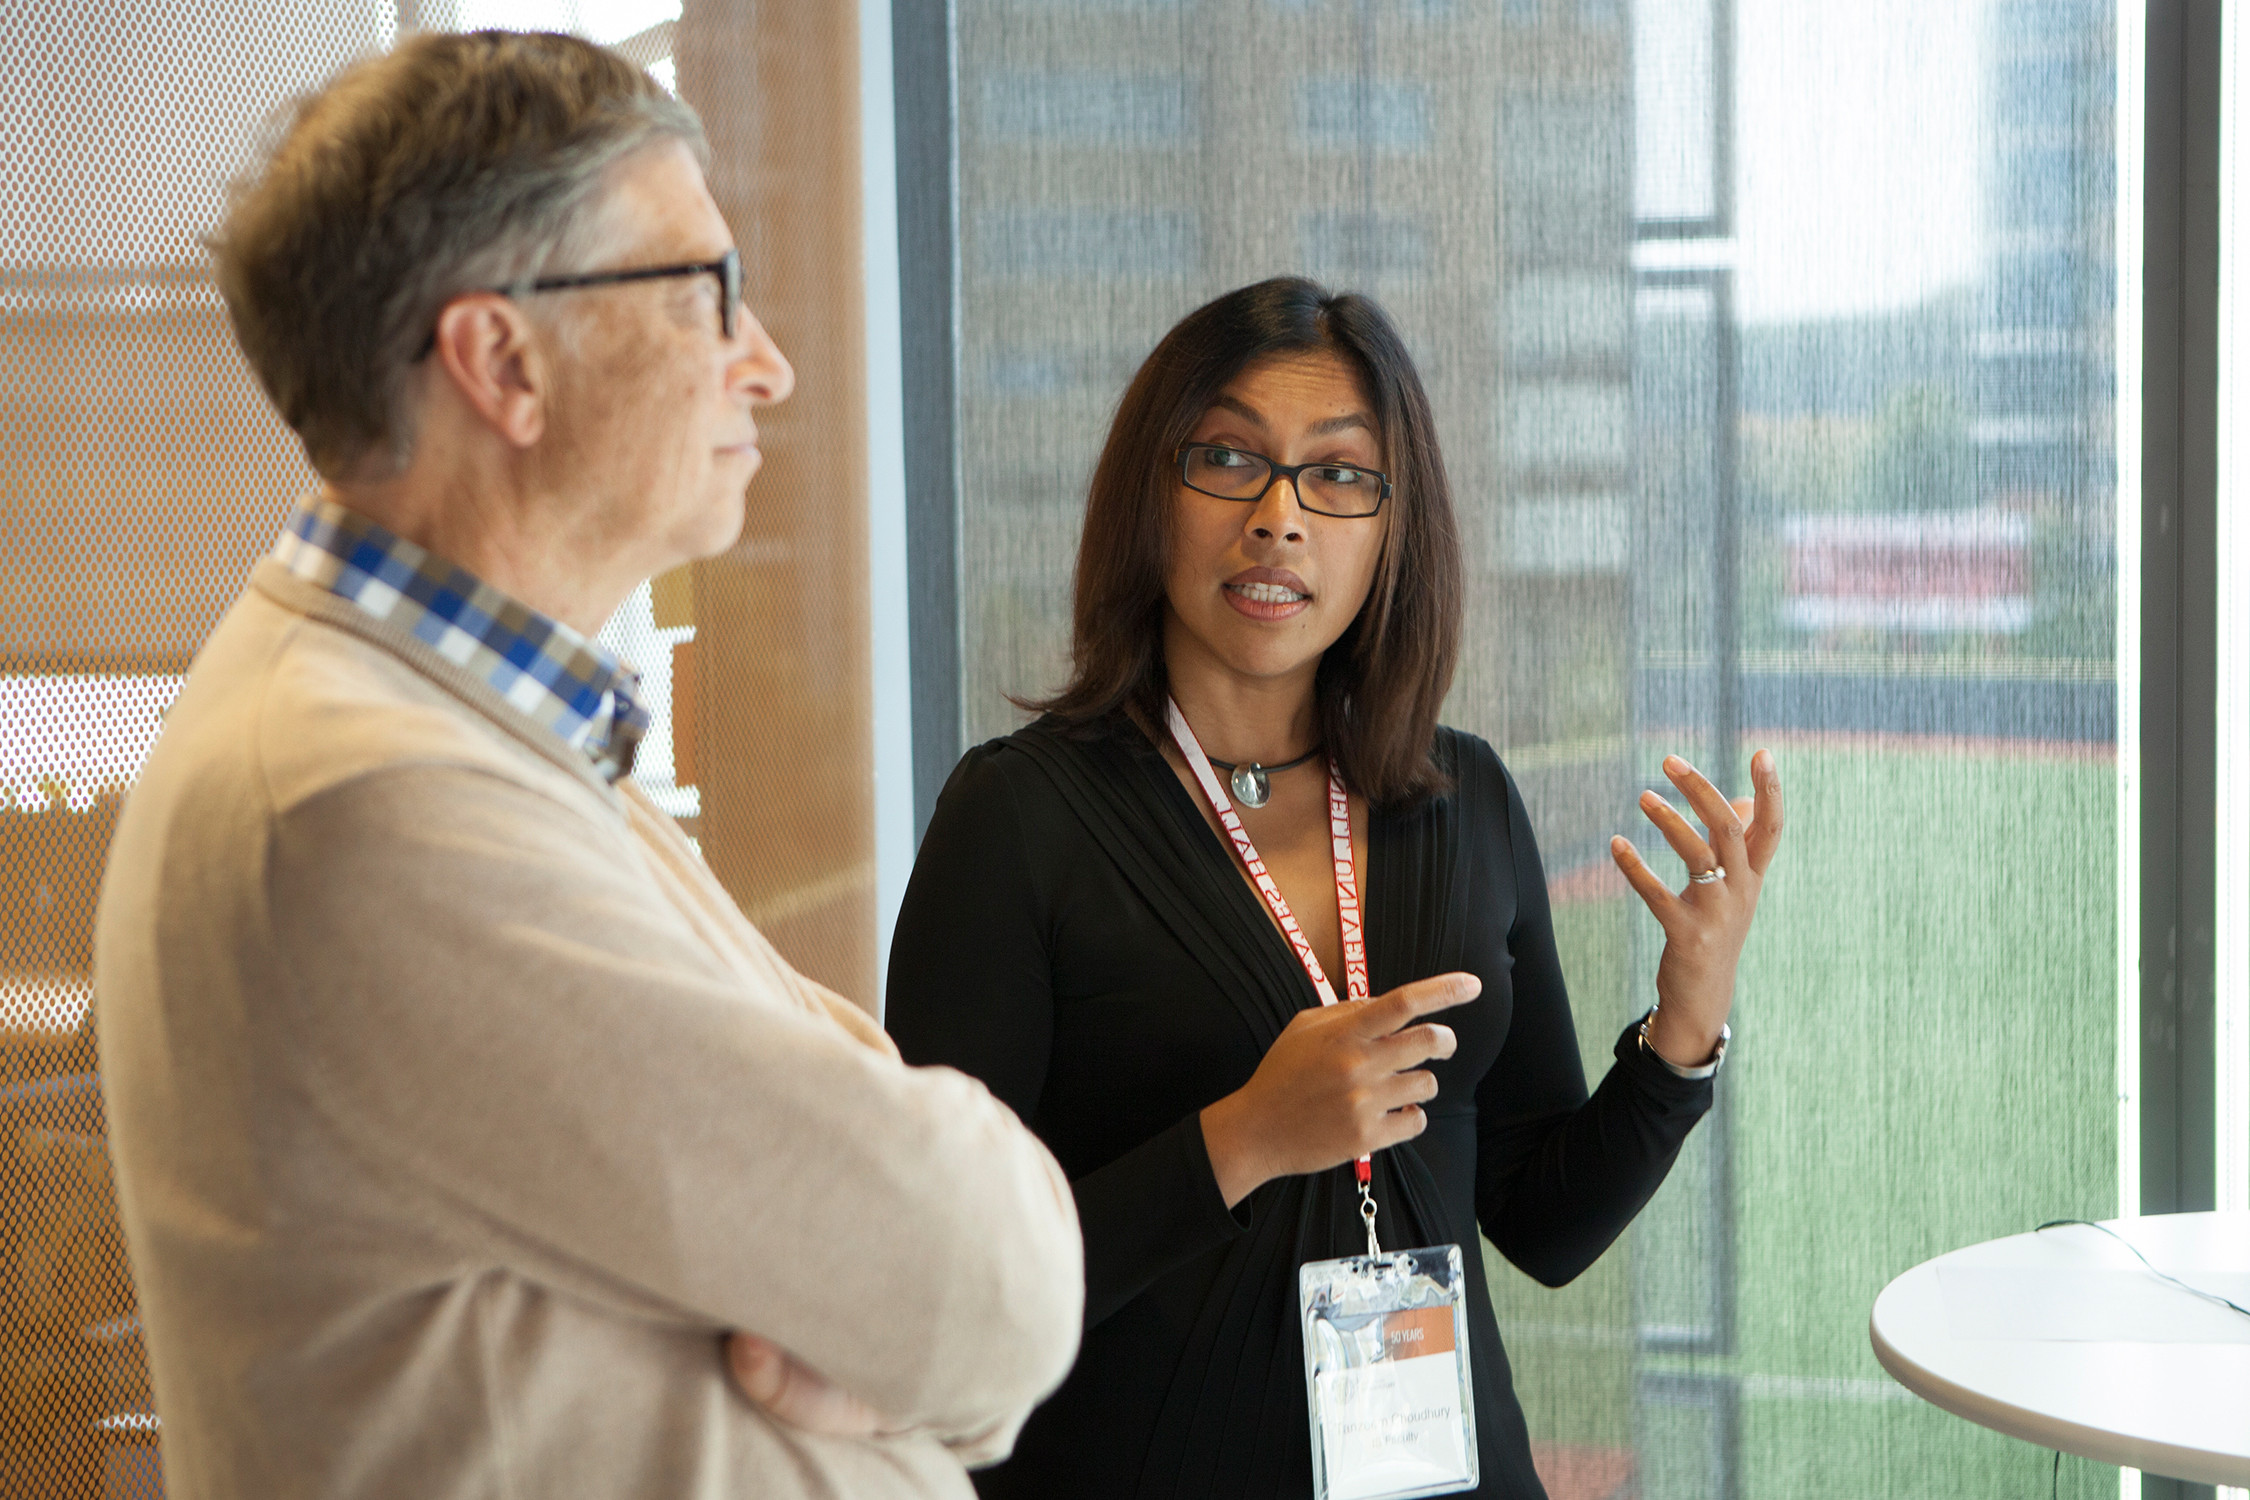 Info Sci Professor Tanzeem Choudhury talks with Bill Gates during his visit to the Cornell campus.